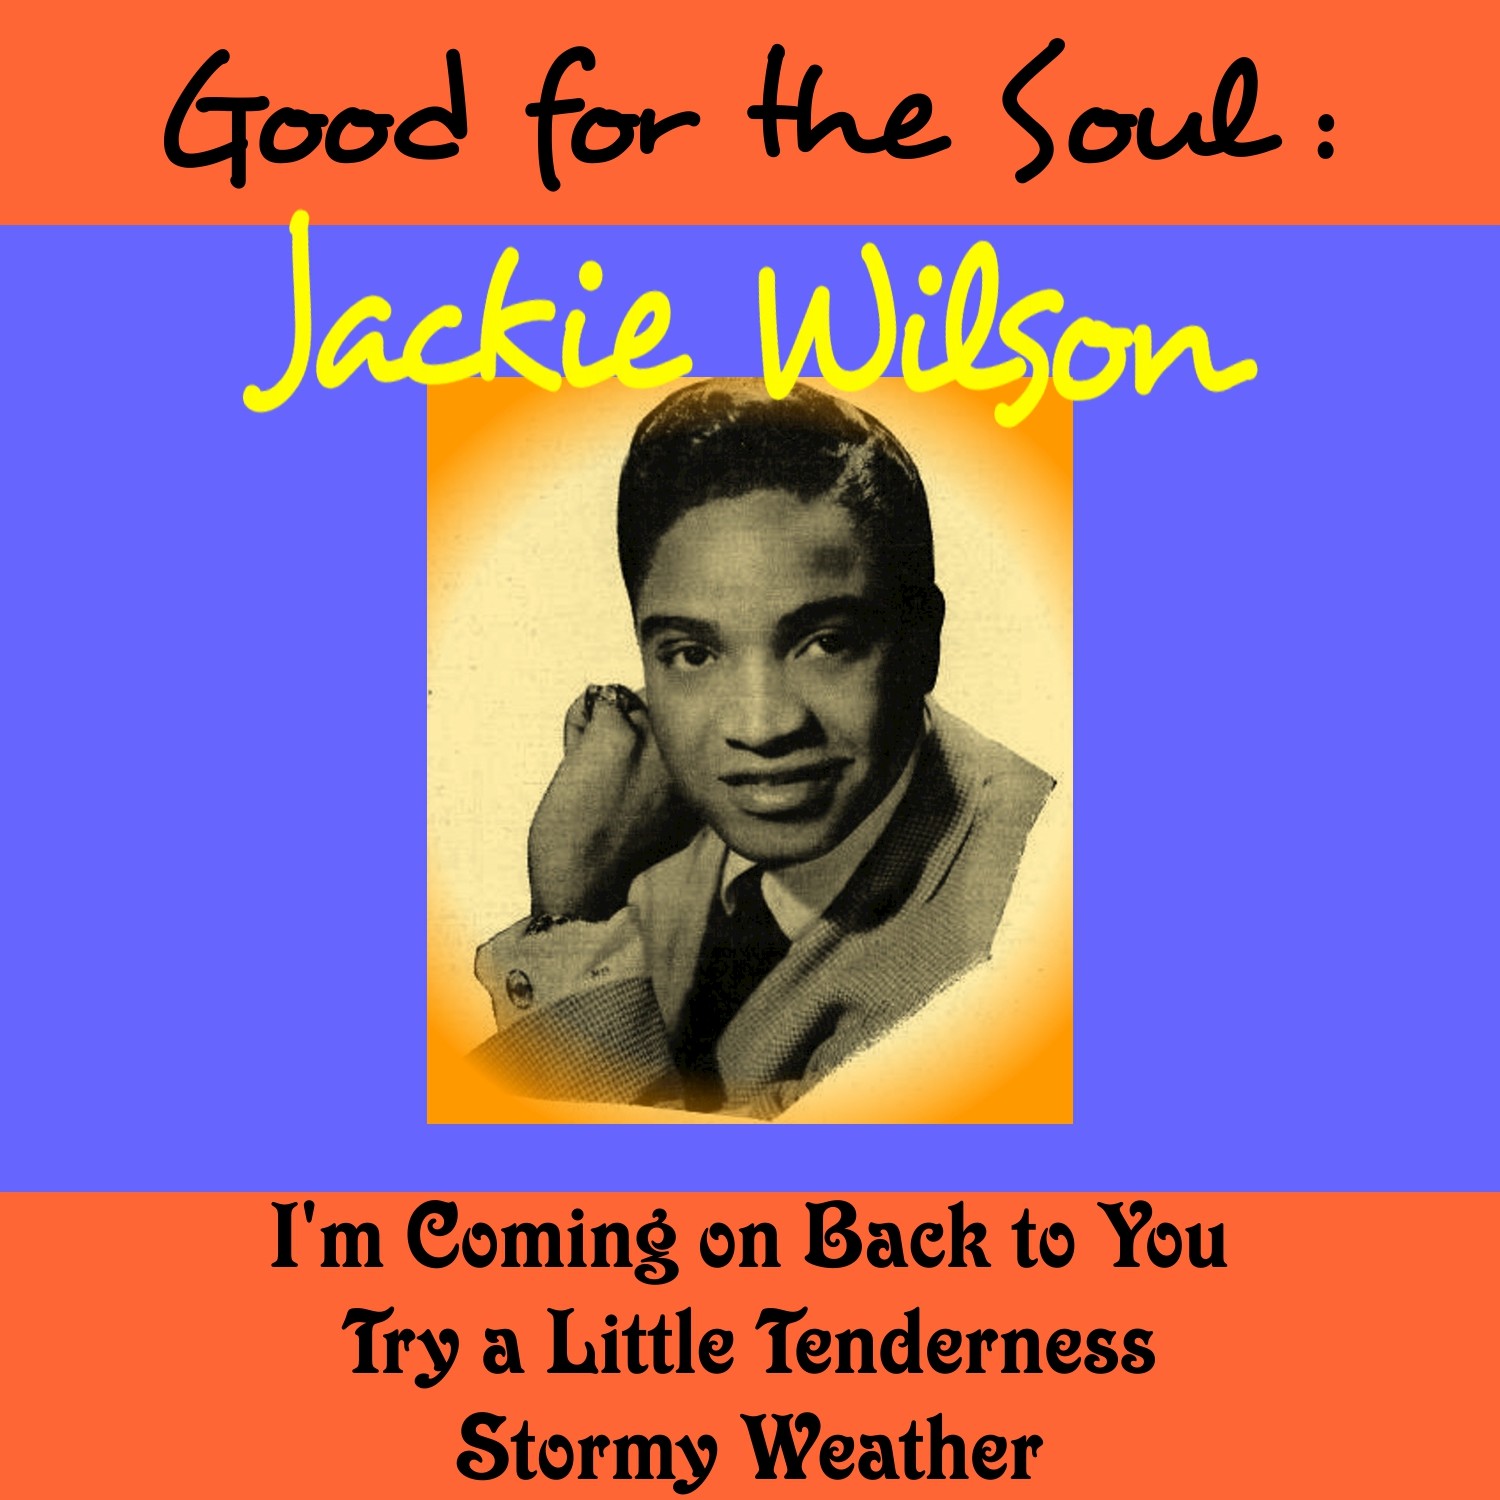 Good for the Soul: Jackie Wilson